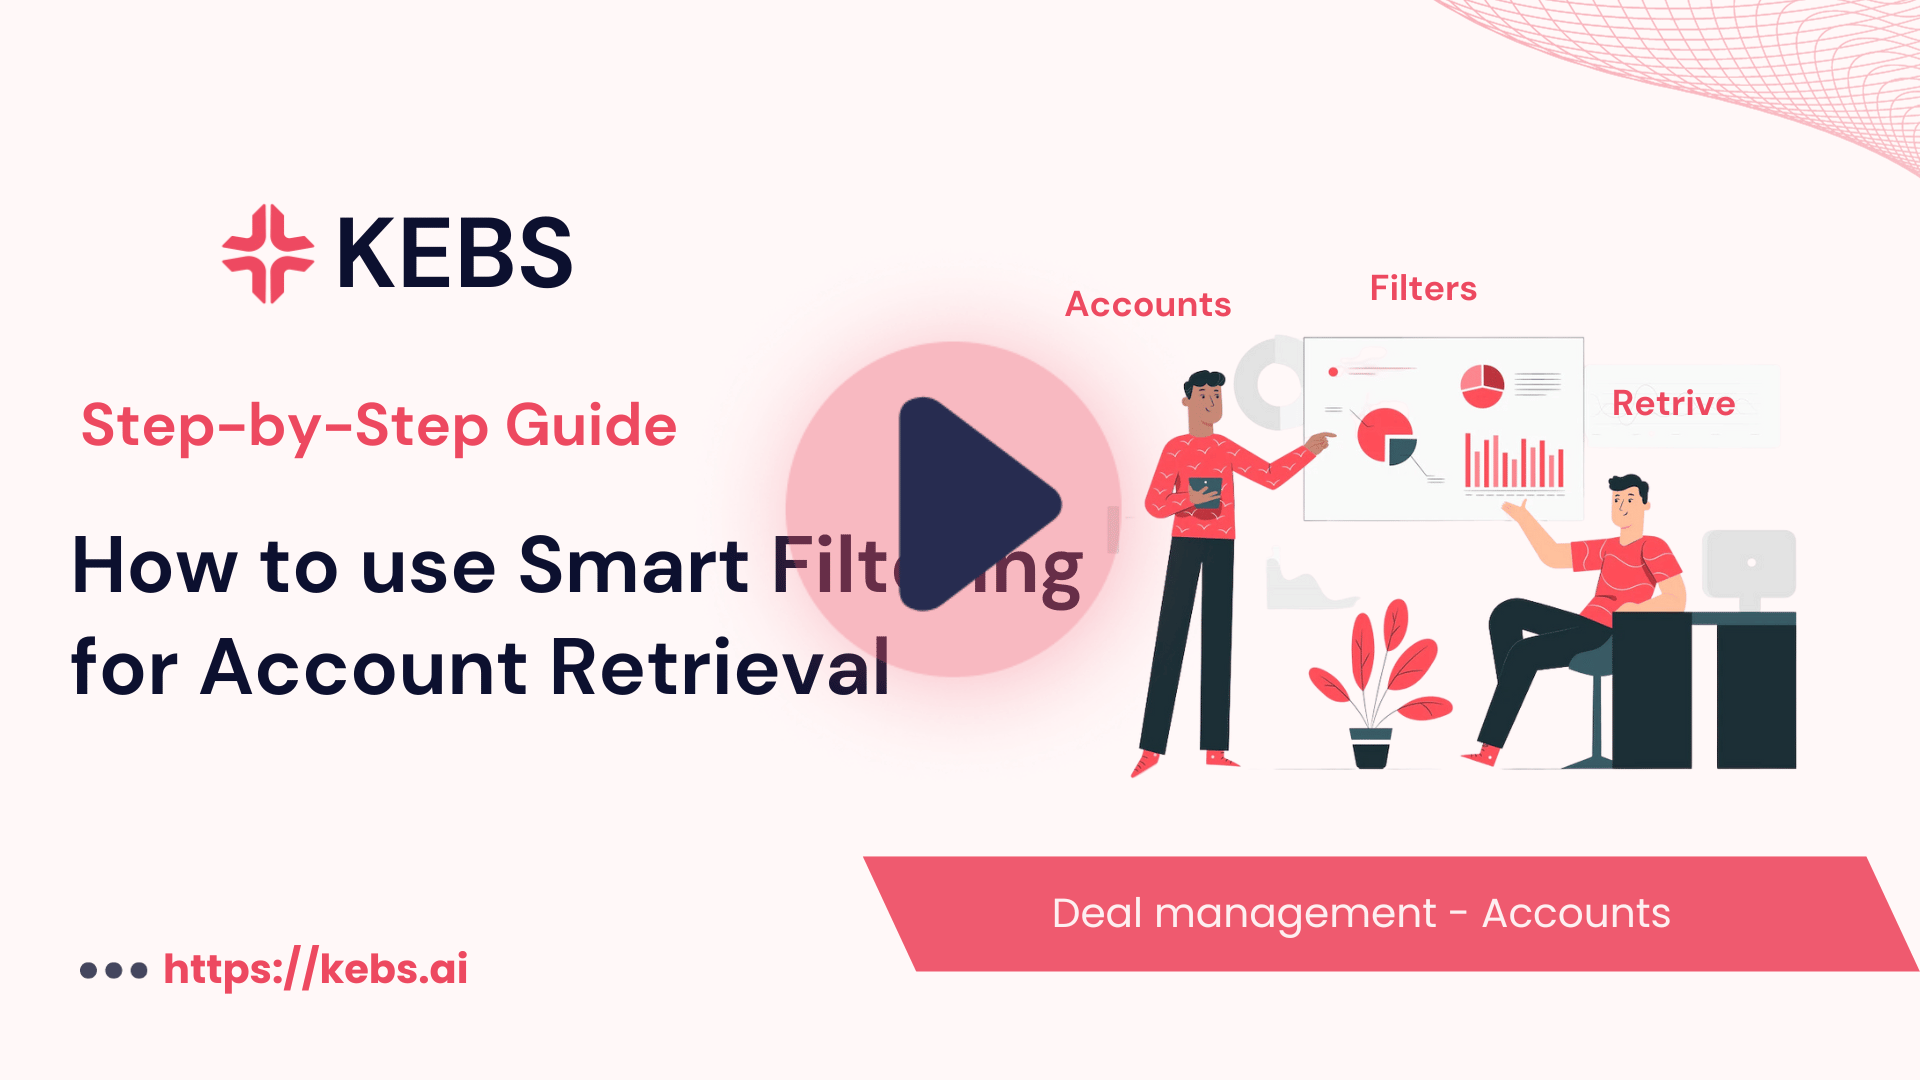 How to use Smart Filtering for Account Retrieval